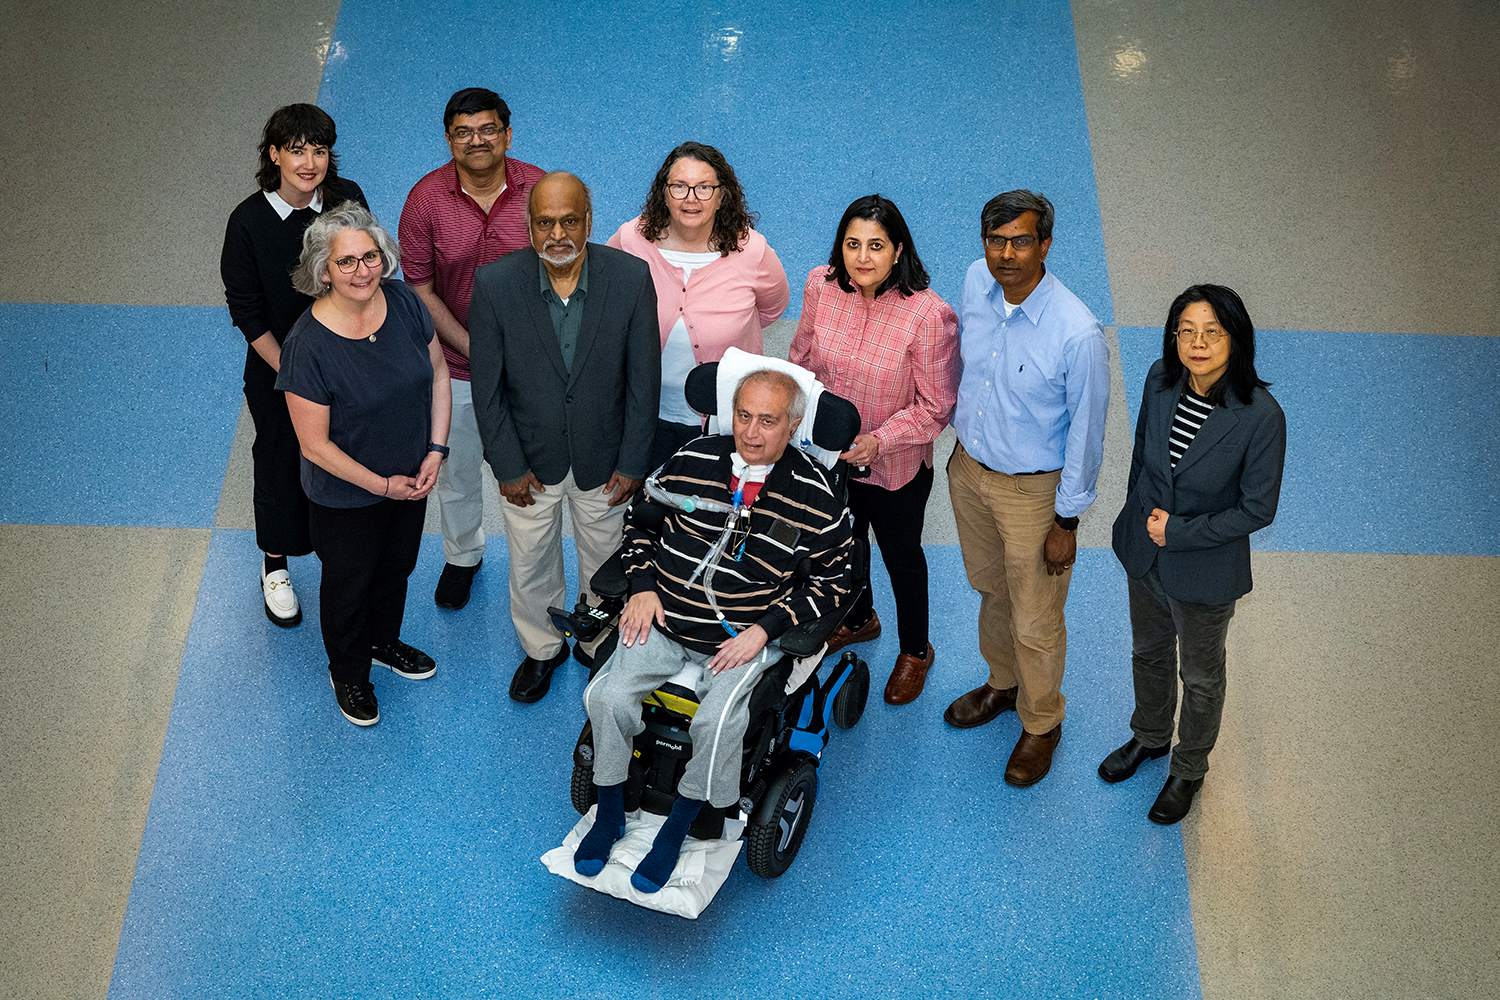 Members of the CART research team assembled in the New Computer Science building at Stony Brook. Vibha Mullick, and her husband, ALS patient Anuraag Mullick, in the center. Back row, from left: Clare Whitney, Nilanjan Chakraborty, Theresa Imperato, C.R. Ramakrishnan, and Wei Zhu. Front row, from left, are Maria Milazzo and I.V. Ramakrishnan. Credit: John Griffin/Stony Brook University